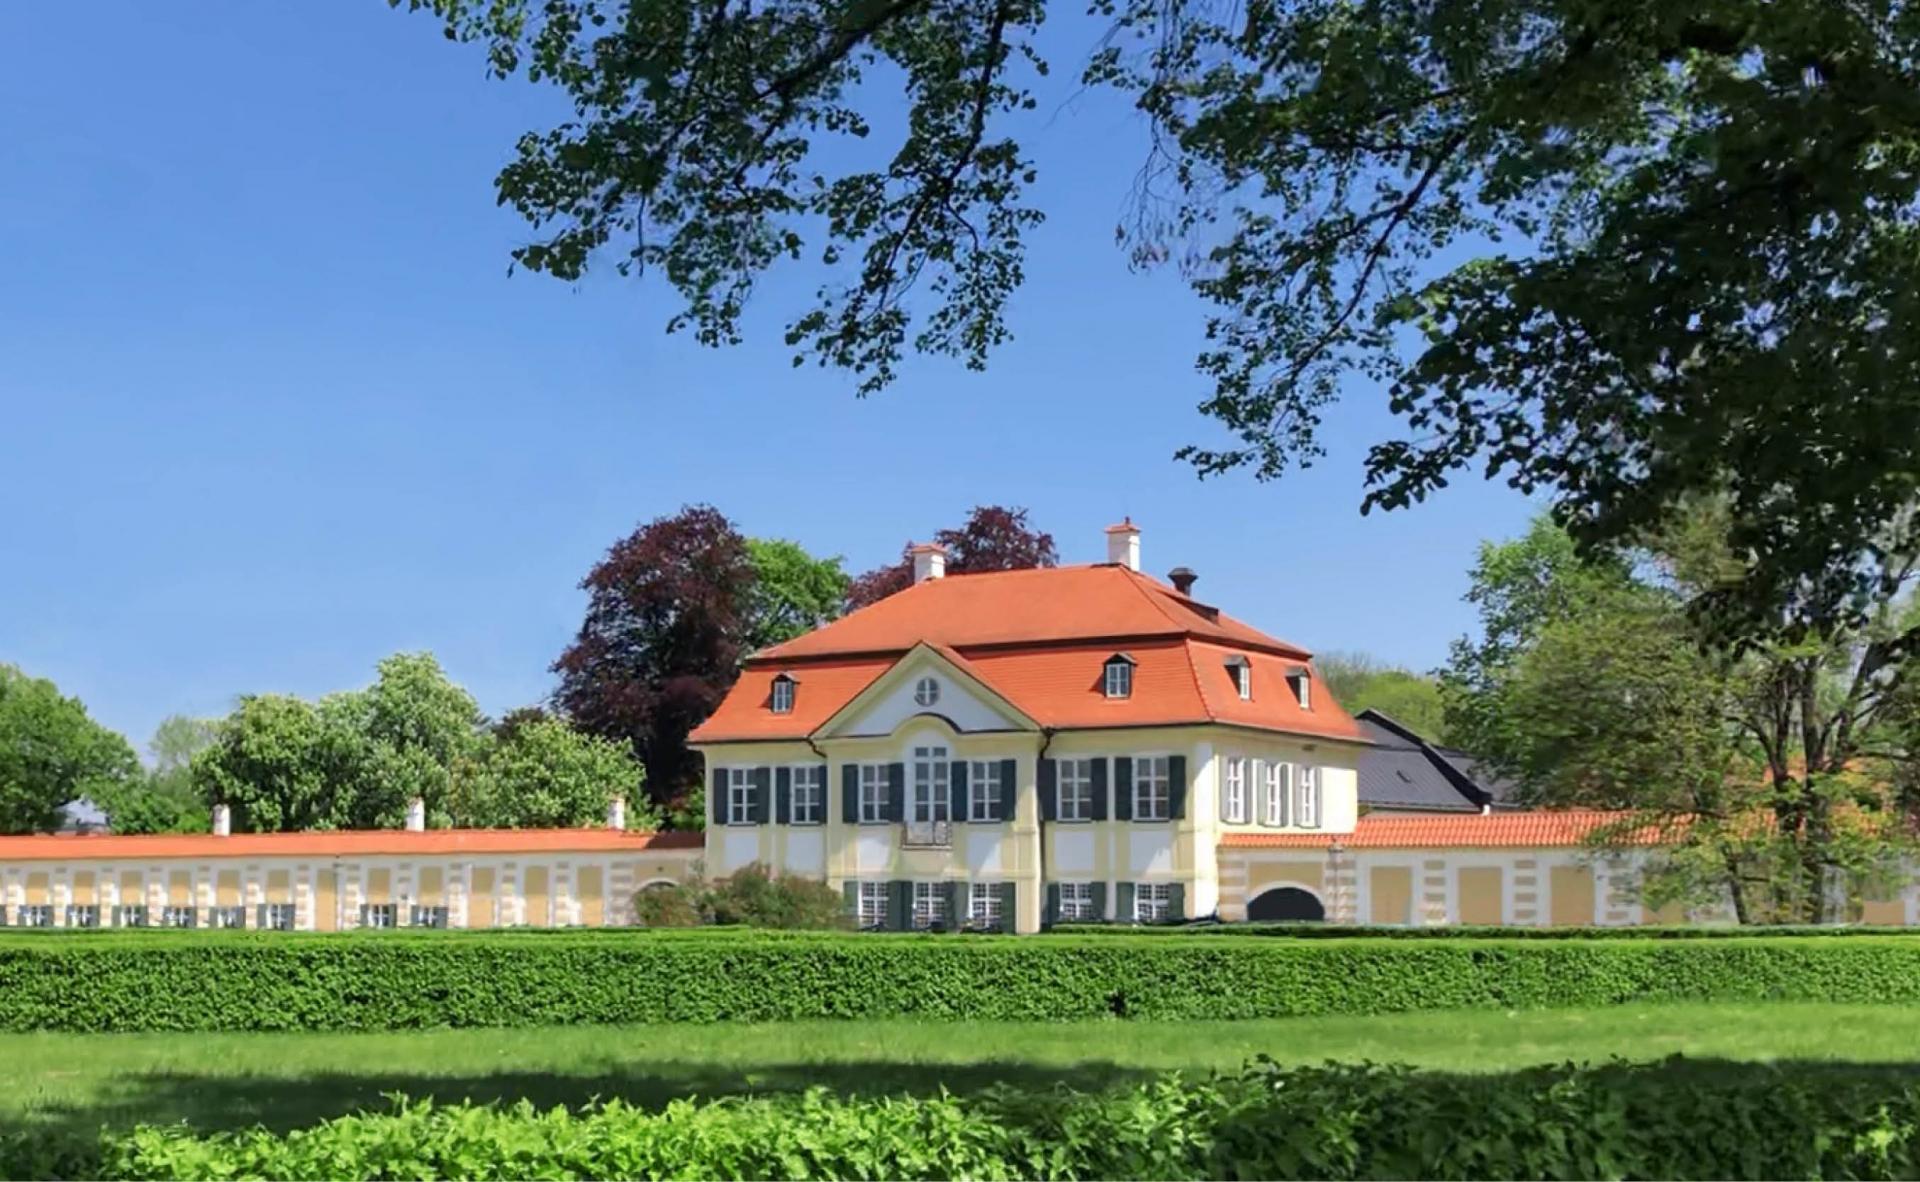 Inside an Art-Filled Mansion Steeped in Royal Bavarian History